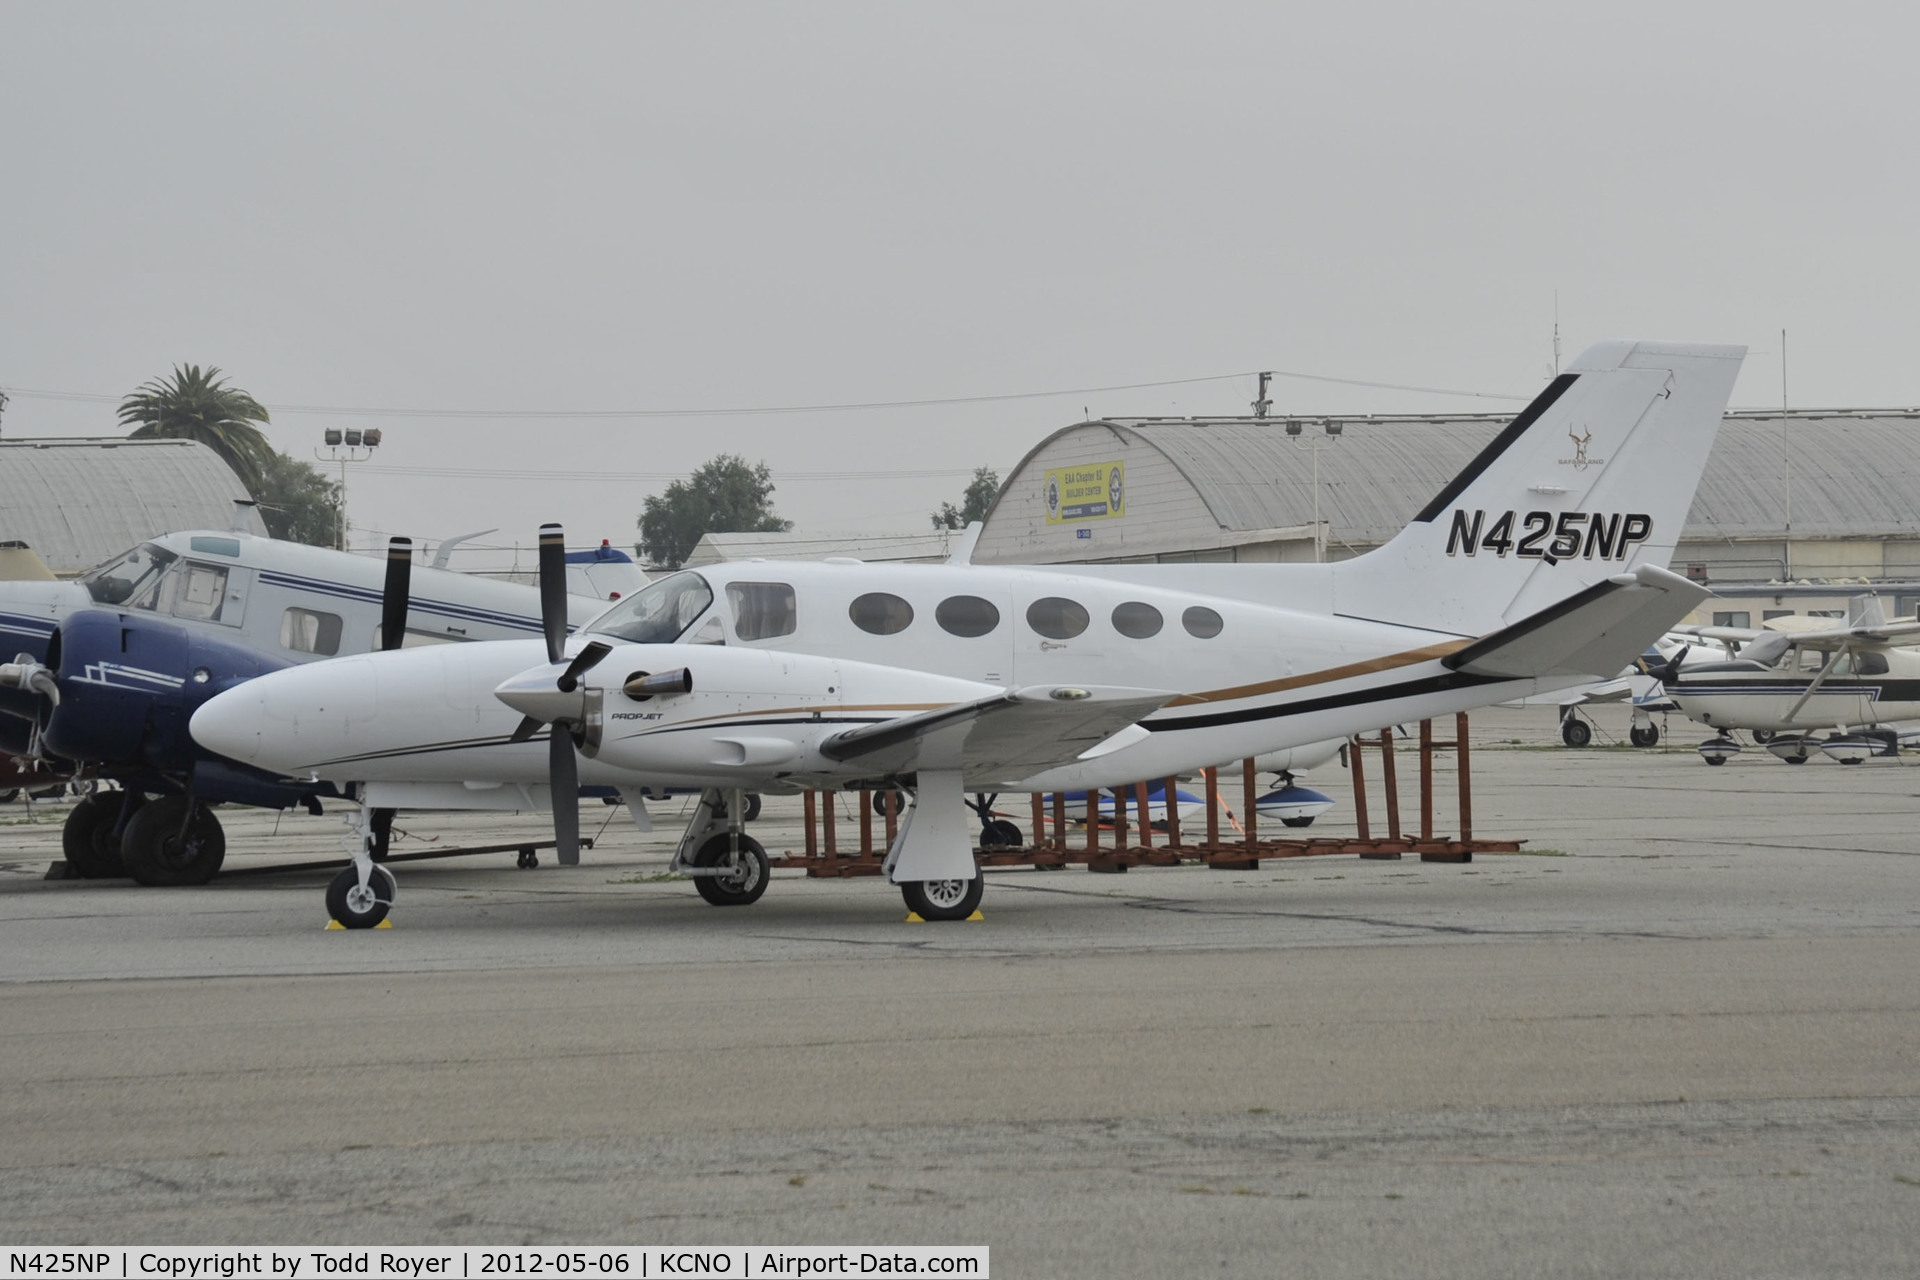 N425NP, 1985 Cessna 425 Conquest I C/N 425-0224, Parked at Chino